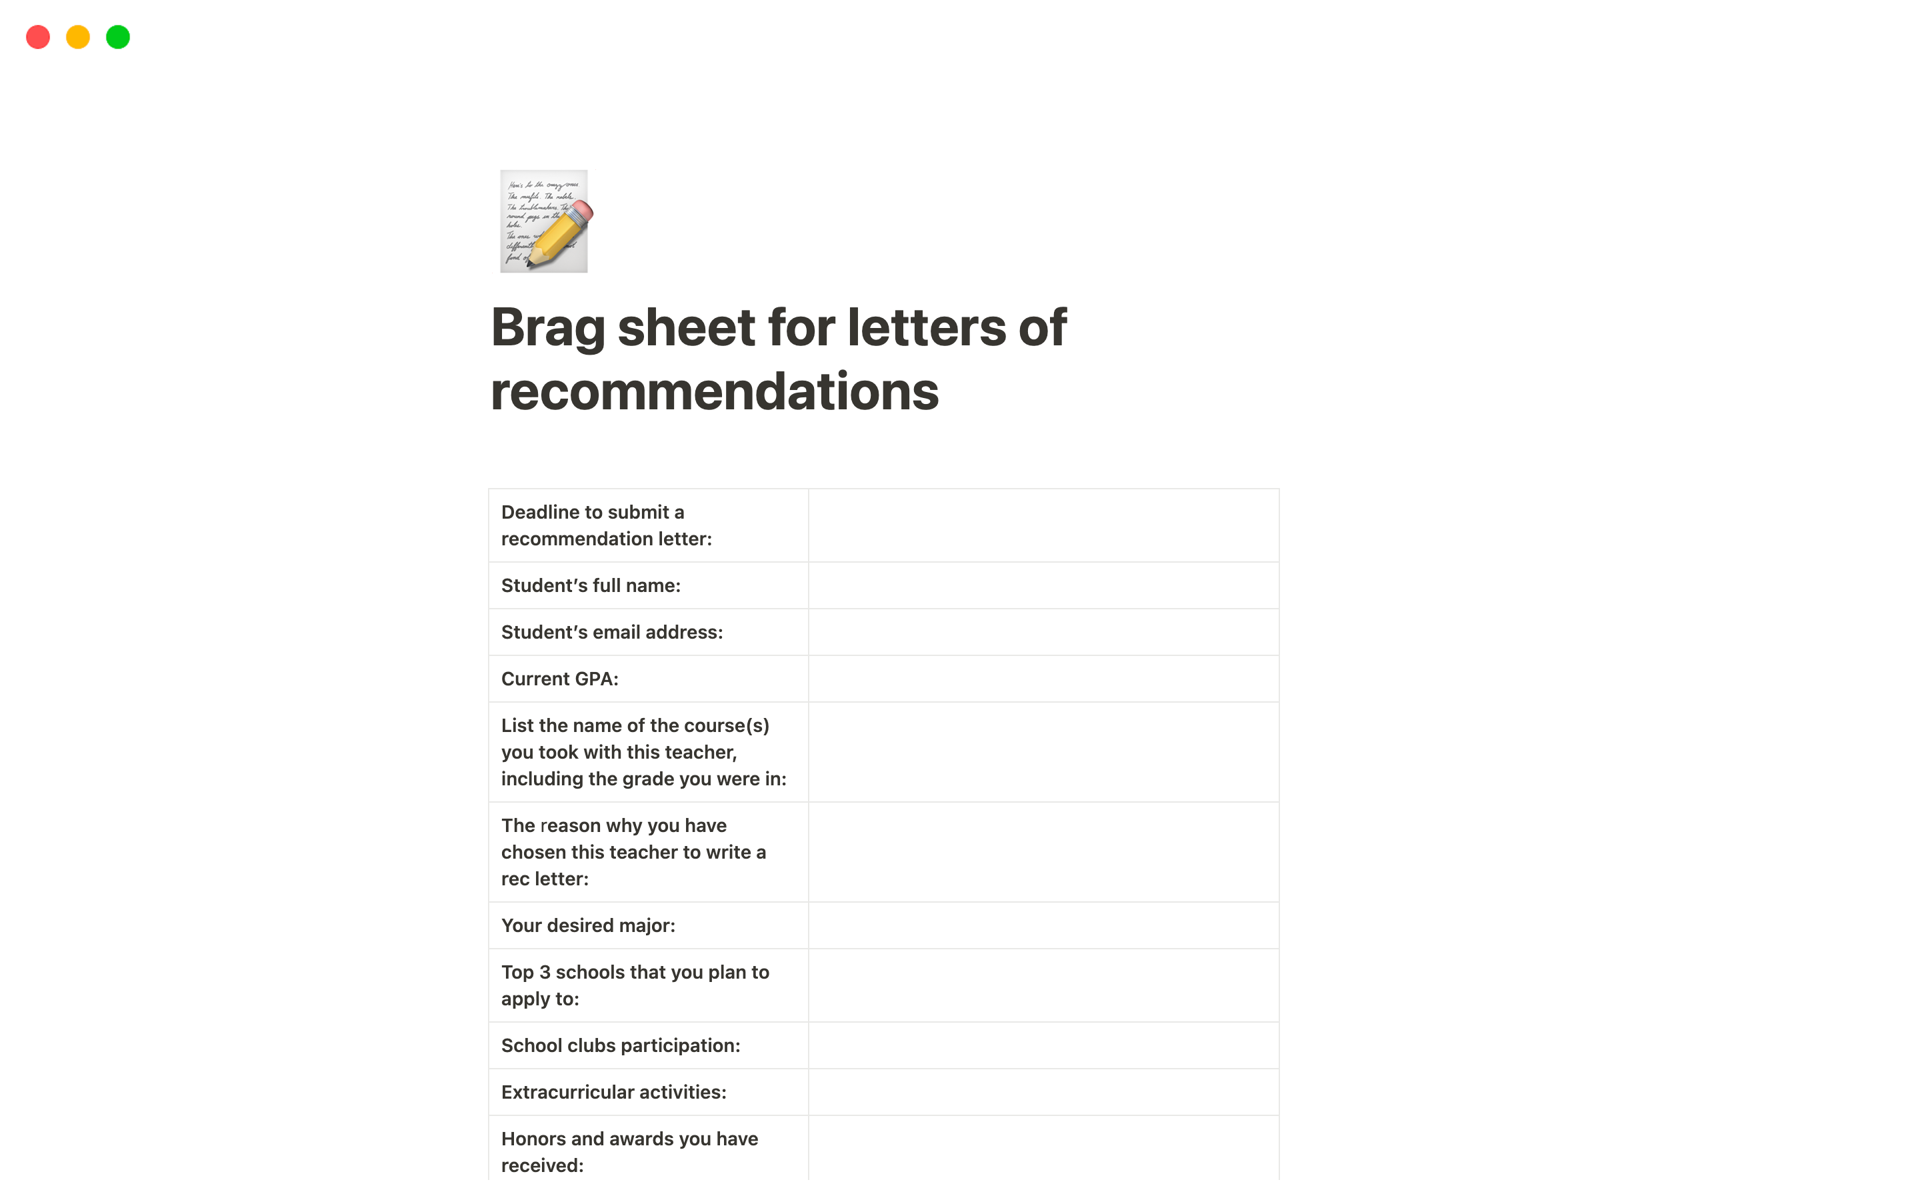 A brag sheet for your recommendation letters to fill out and give to your teacher.